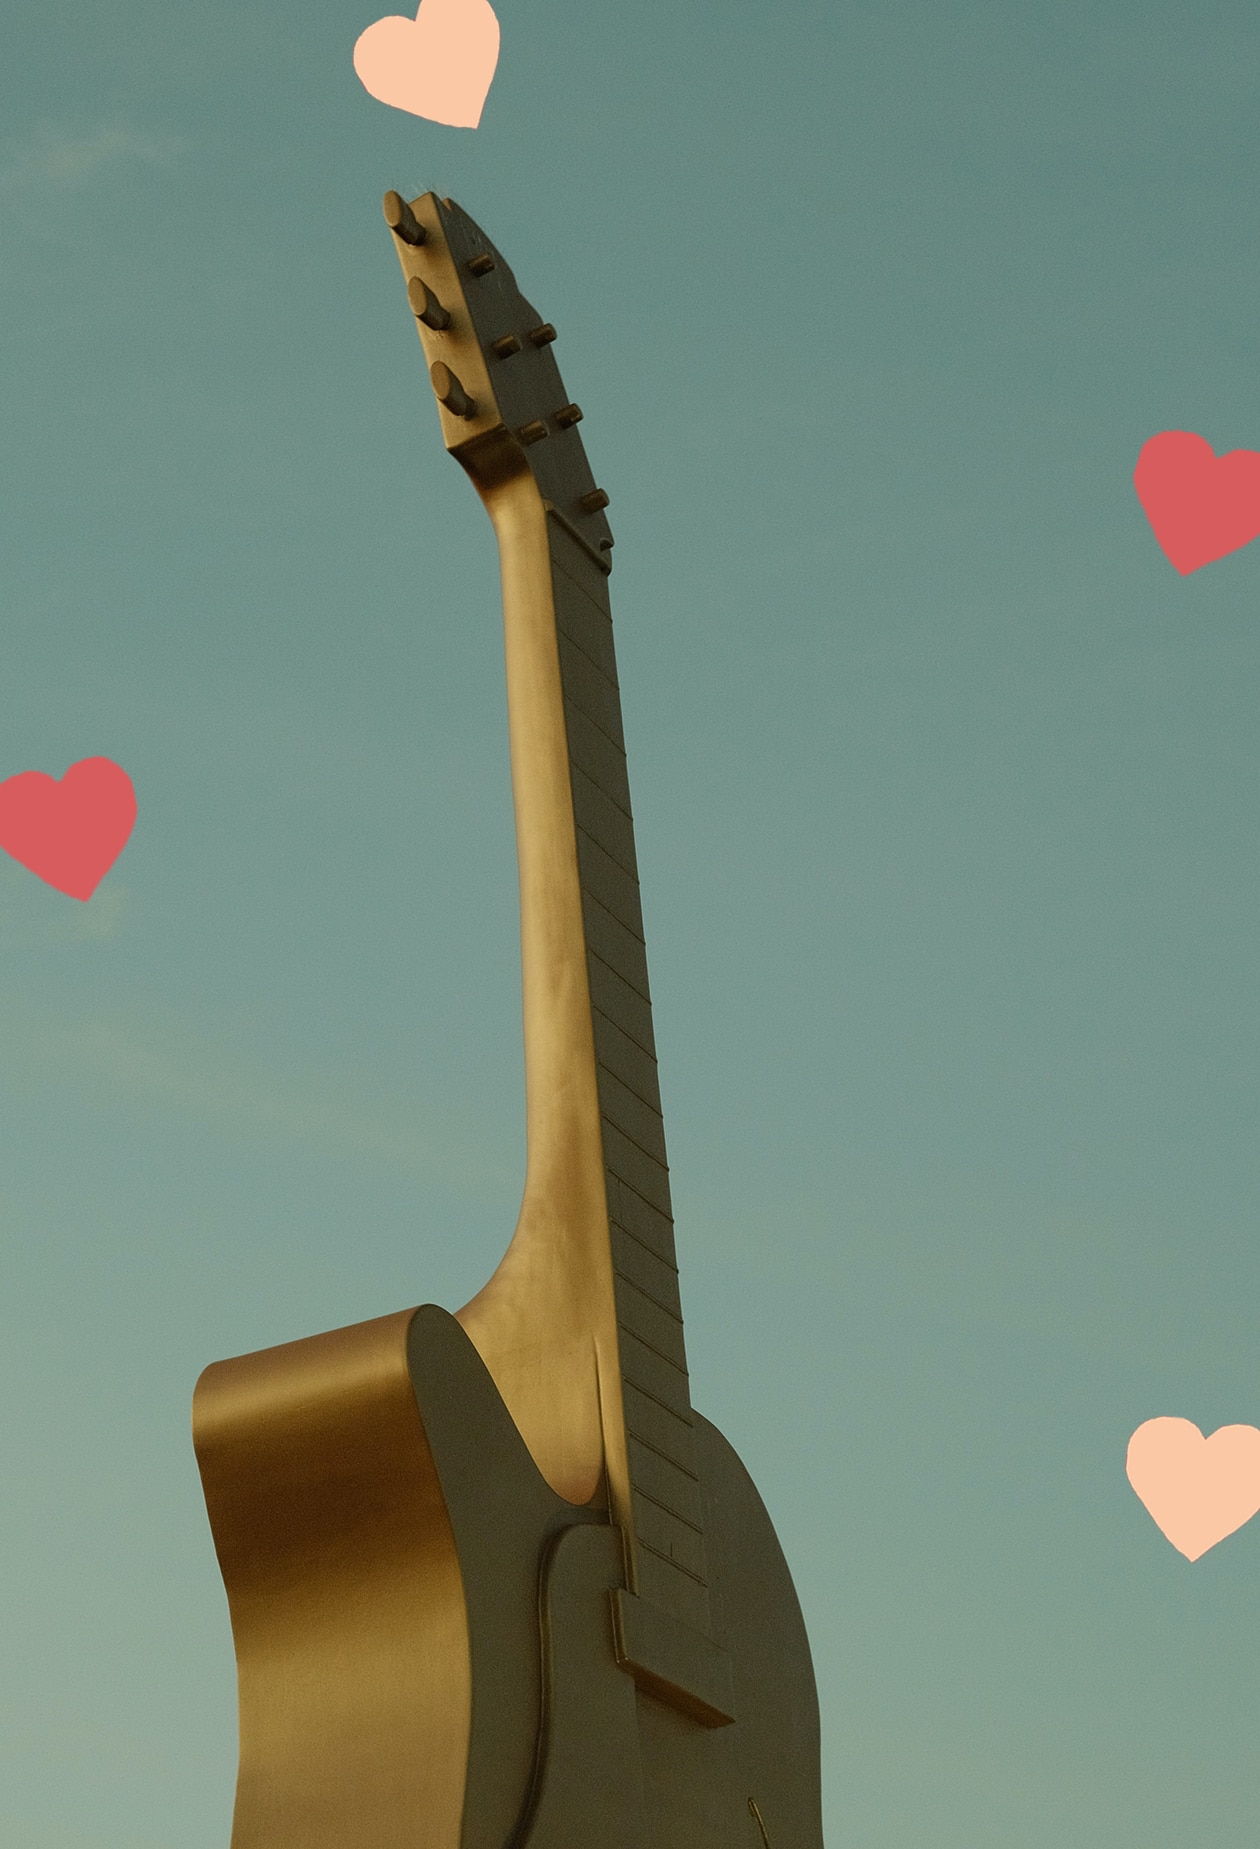 Tamworth's big golden guitar, shot against clear blue sky. Scattered hearts decorate the image.